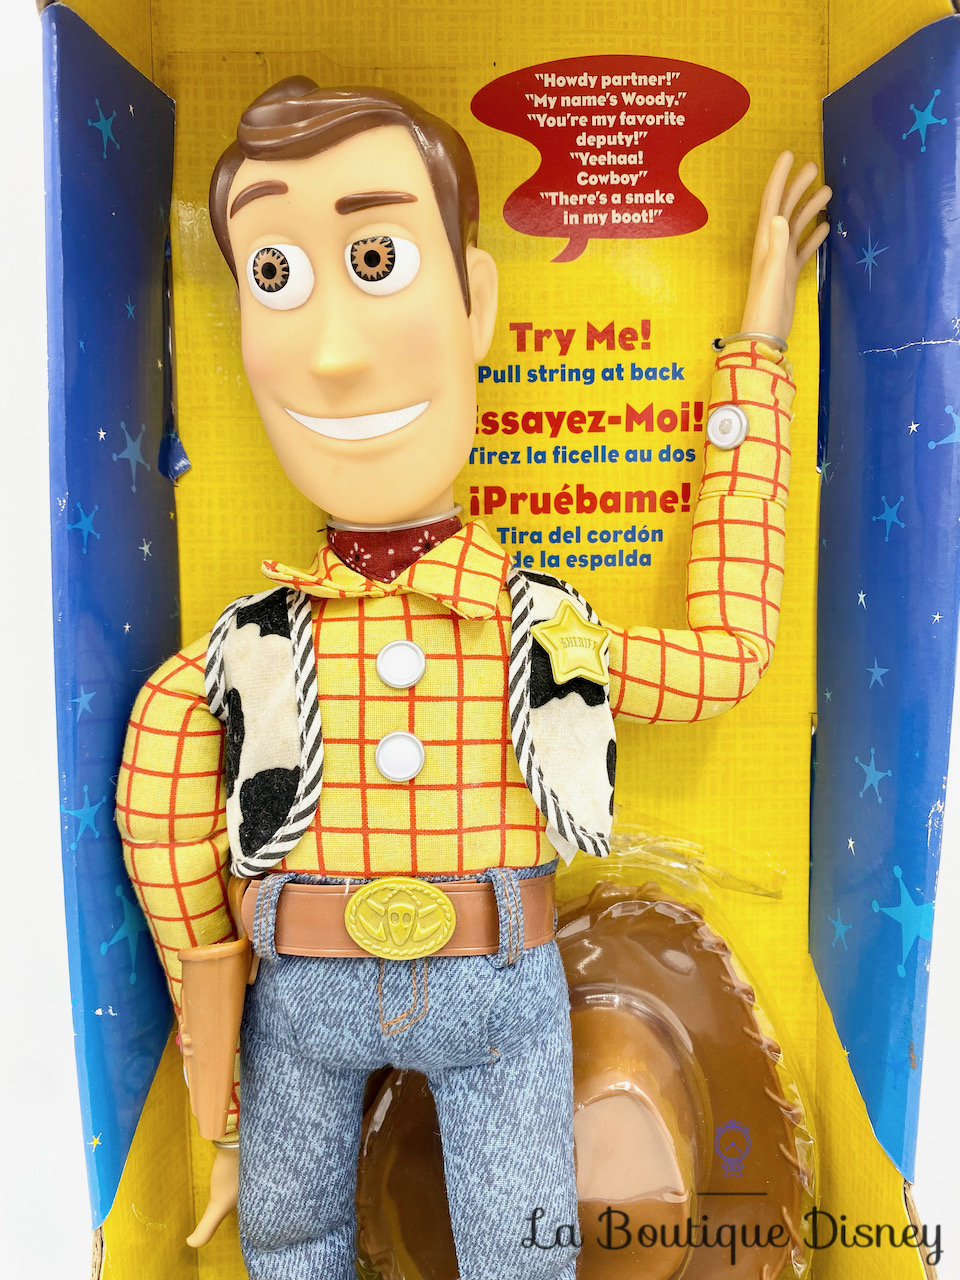 Poupée Woody parlant à ficelle Disneyland 2000 Disney Thinking Toy Story 2  vintage figurine articulée Talking Woody